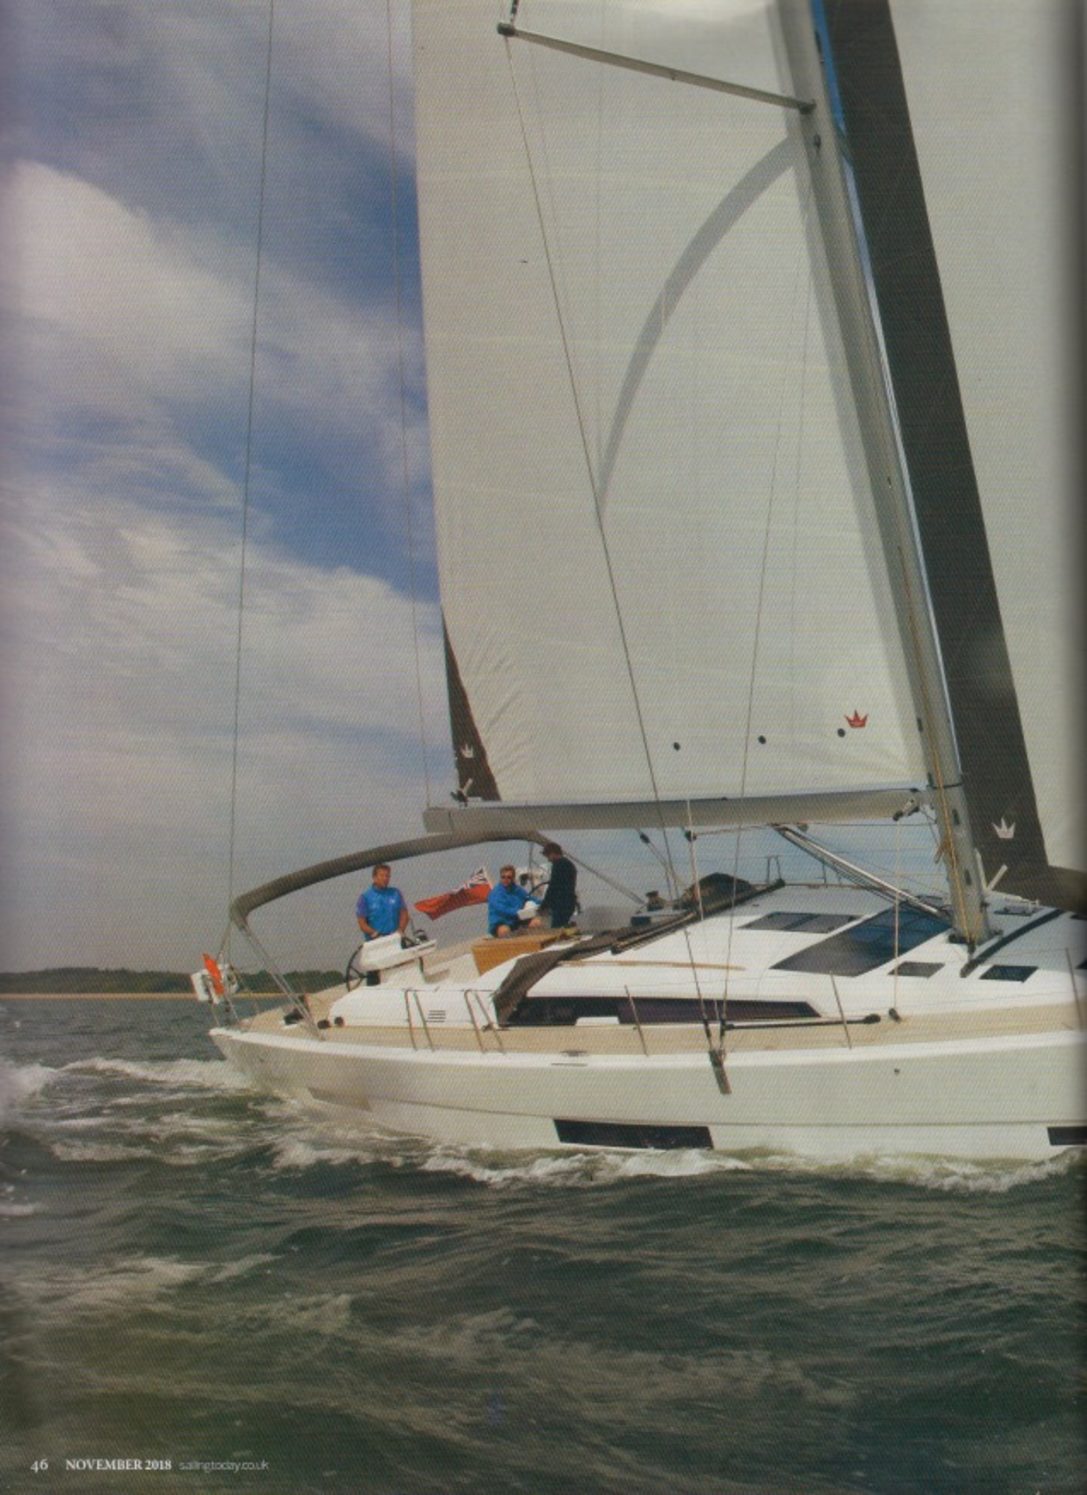 dufour yachts review